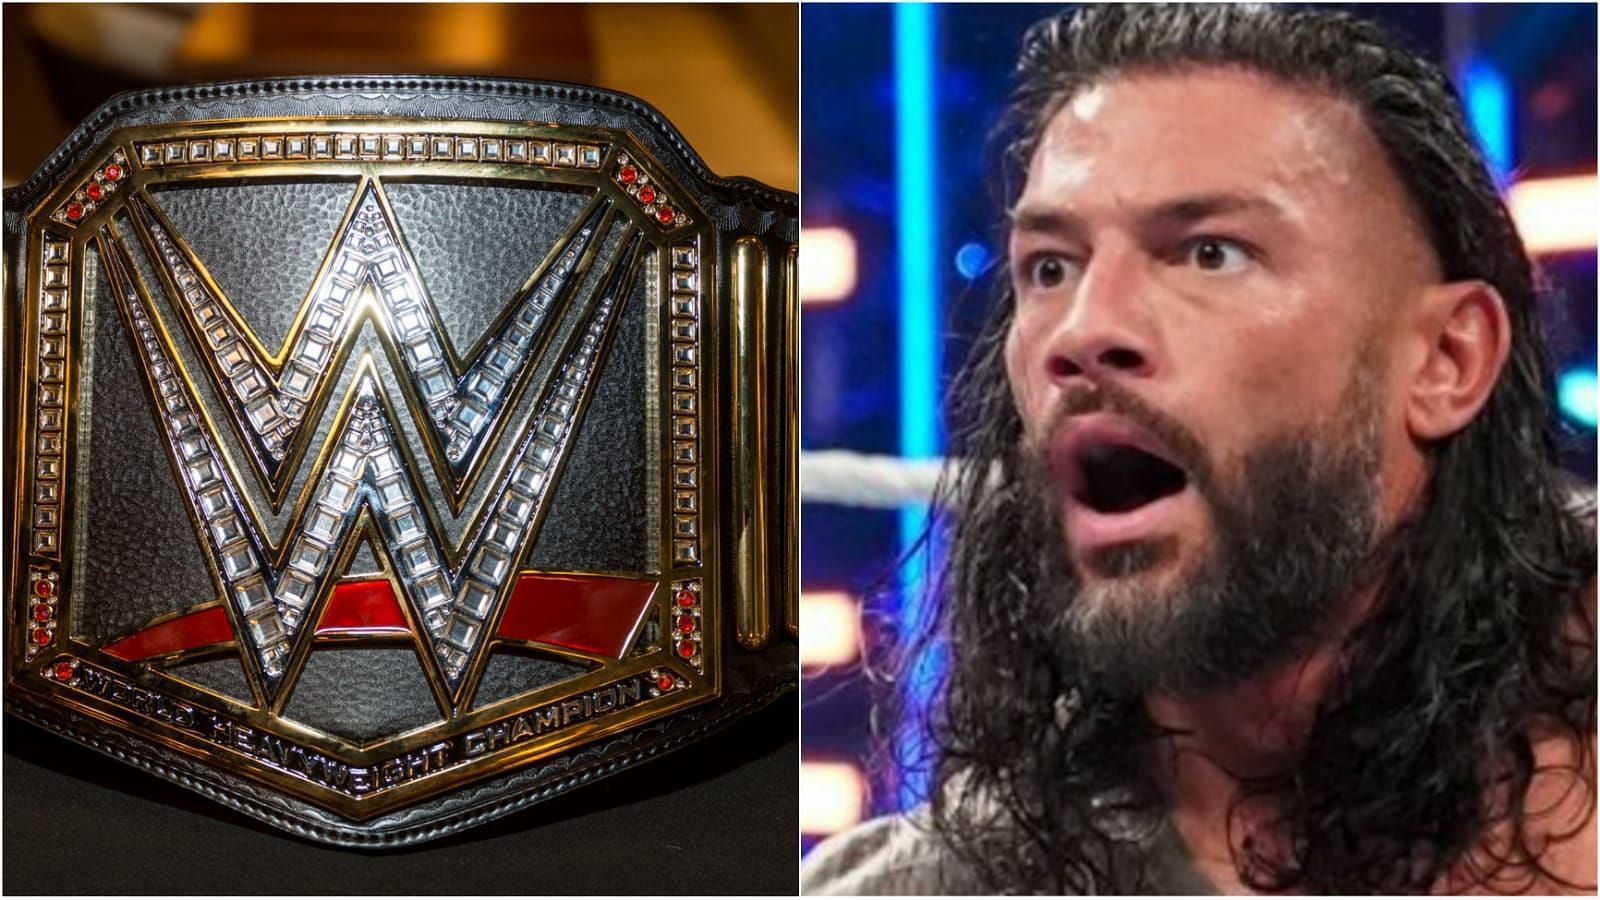 roman-reigns-ain-t-got-nothing-on-him-fans-excited-over-former-wwe-champion-possibly-returning-as-a-heel